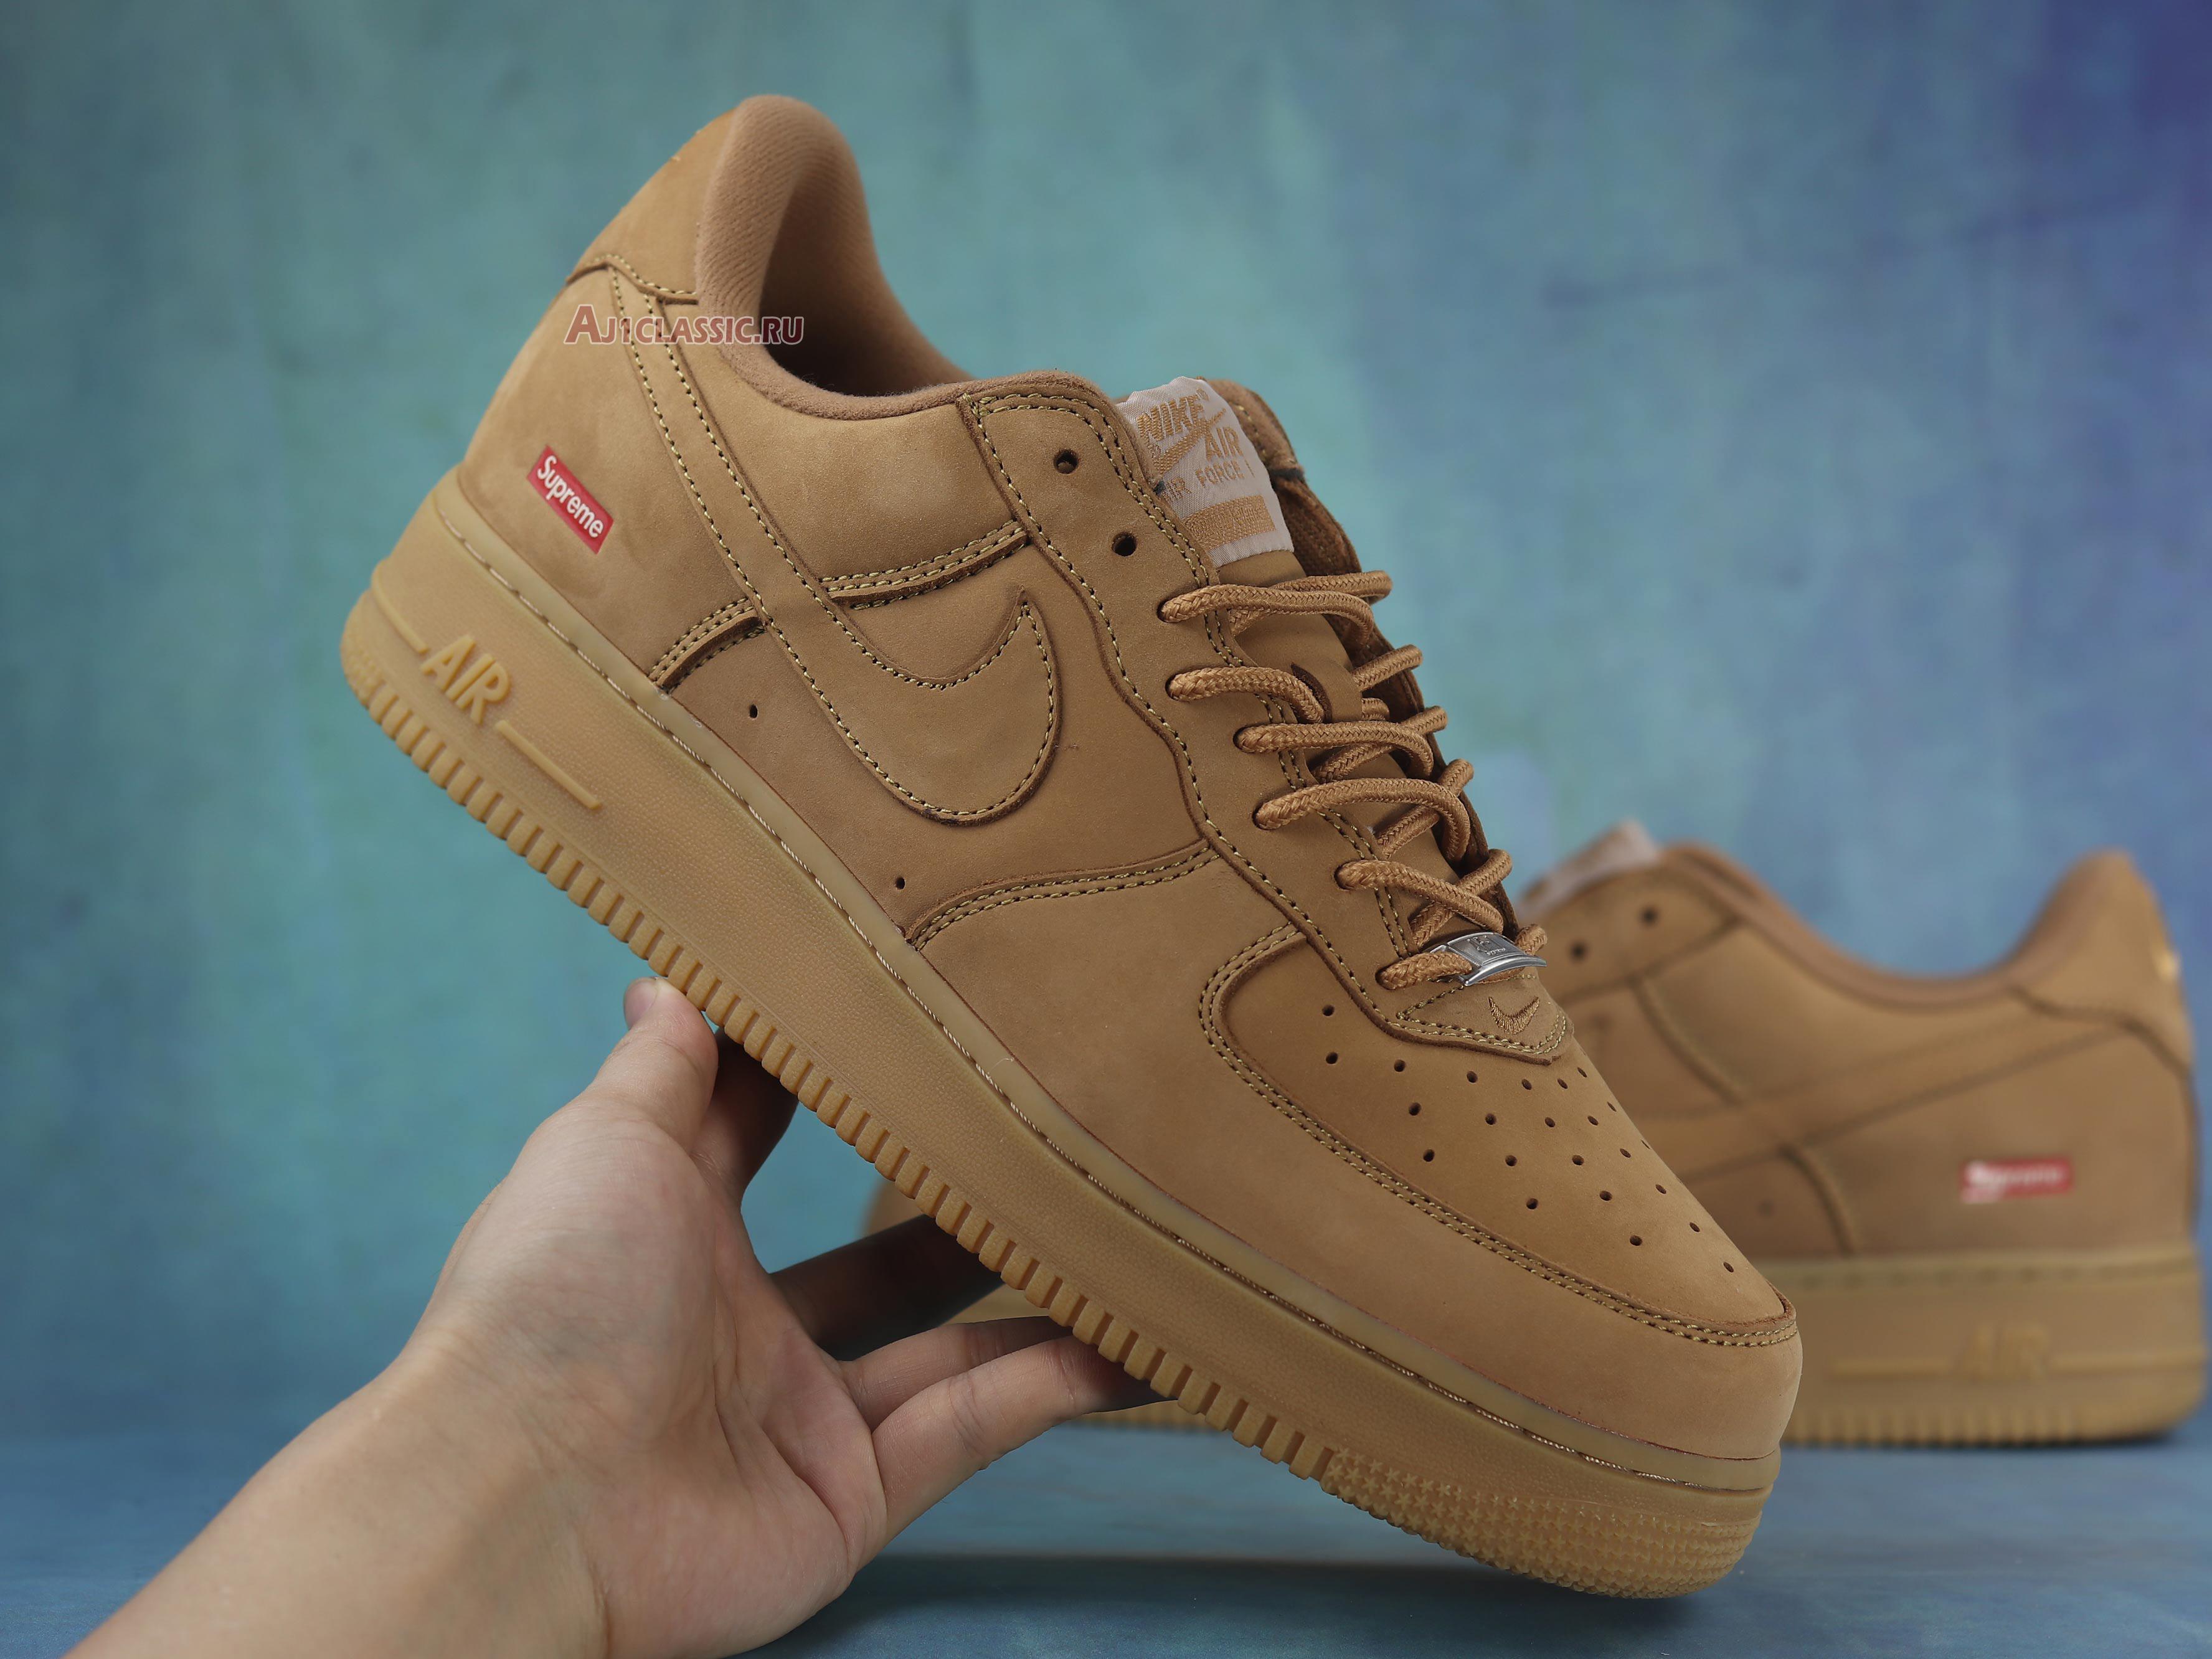 Supreme x Nike Air Force 1 Low SP "Wheat" DN1555-200